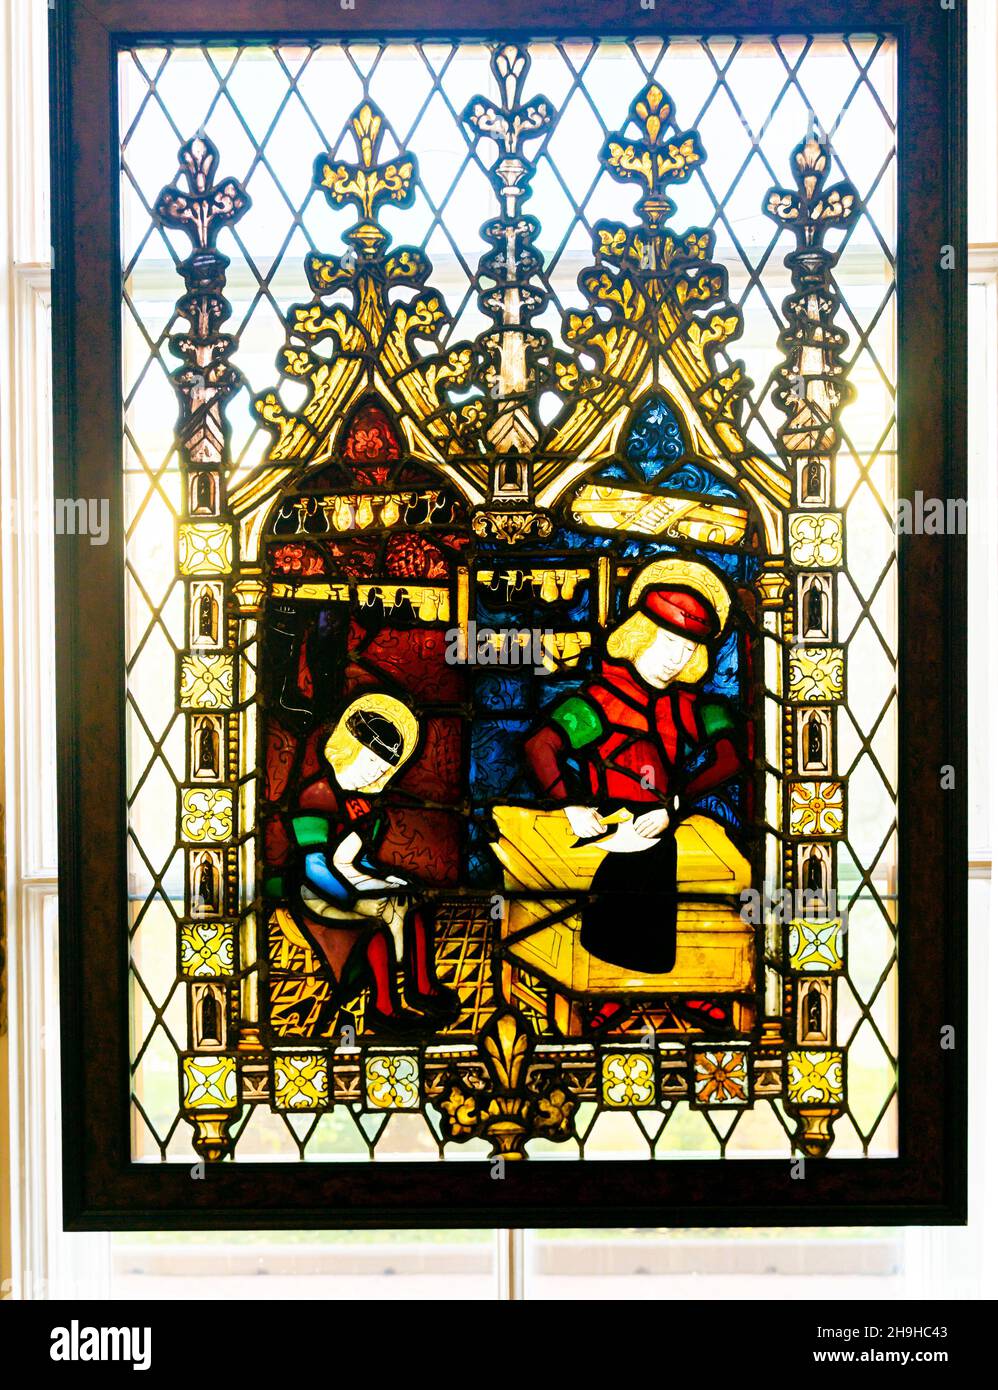 Stained glass panel with saints Crispian and Crispinian, 15 century cc, France, Hermitage museum collection, St. Petersburg, Russia Stock Photo